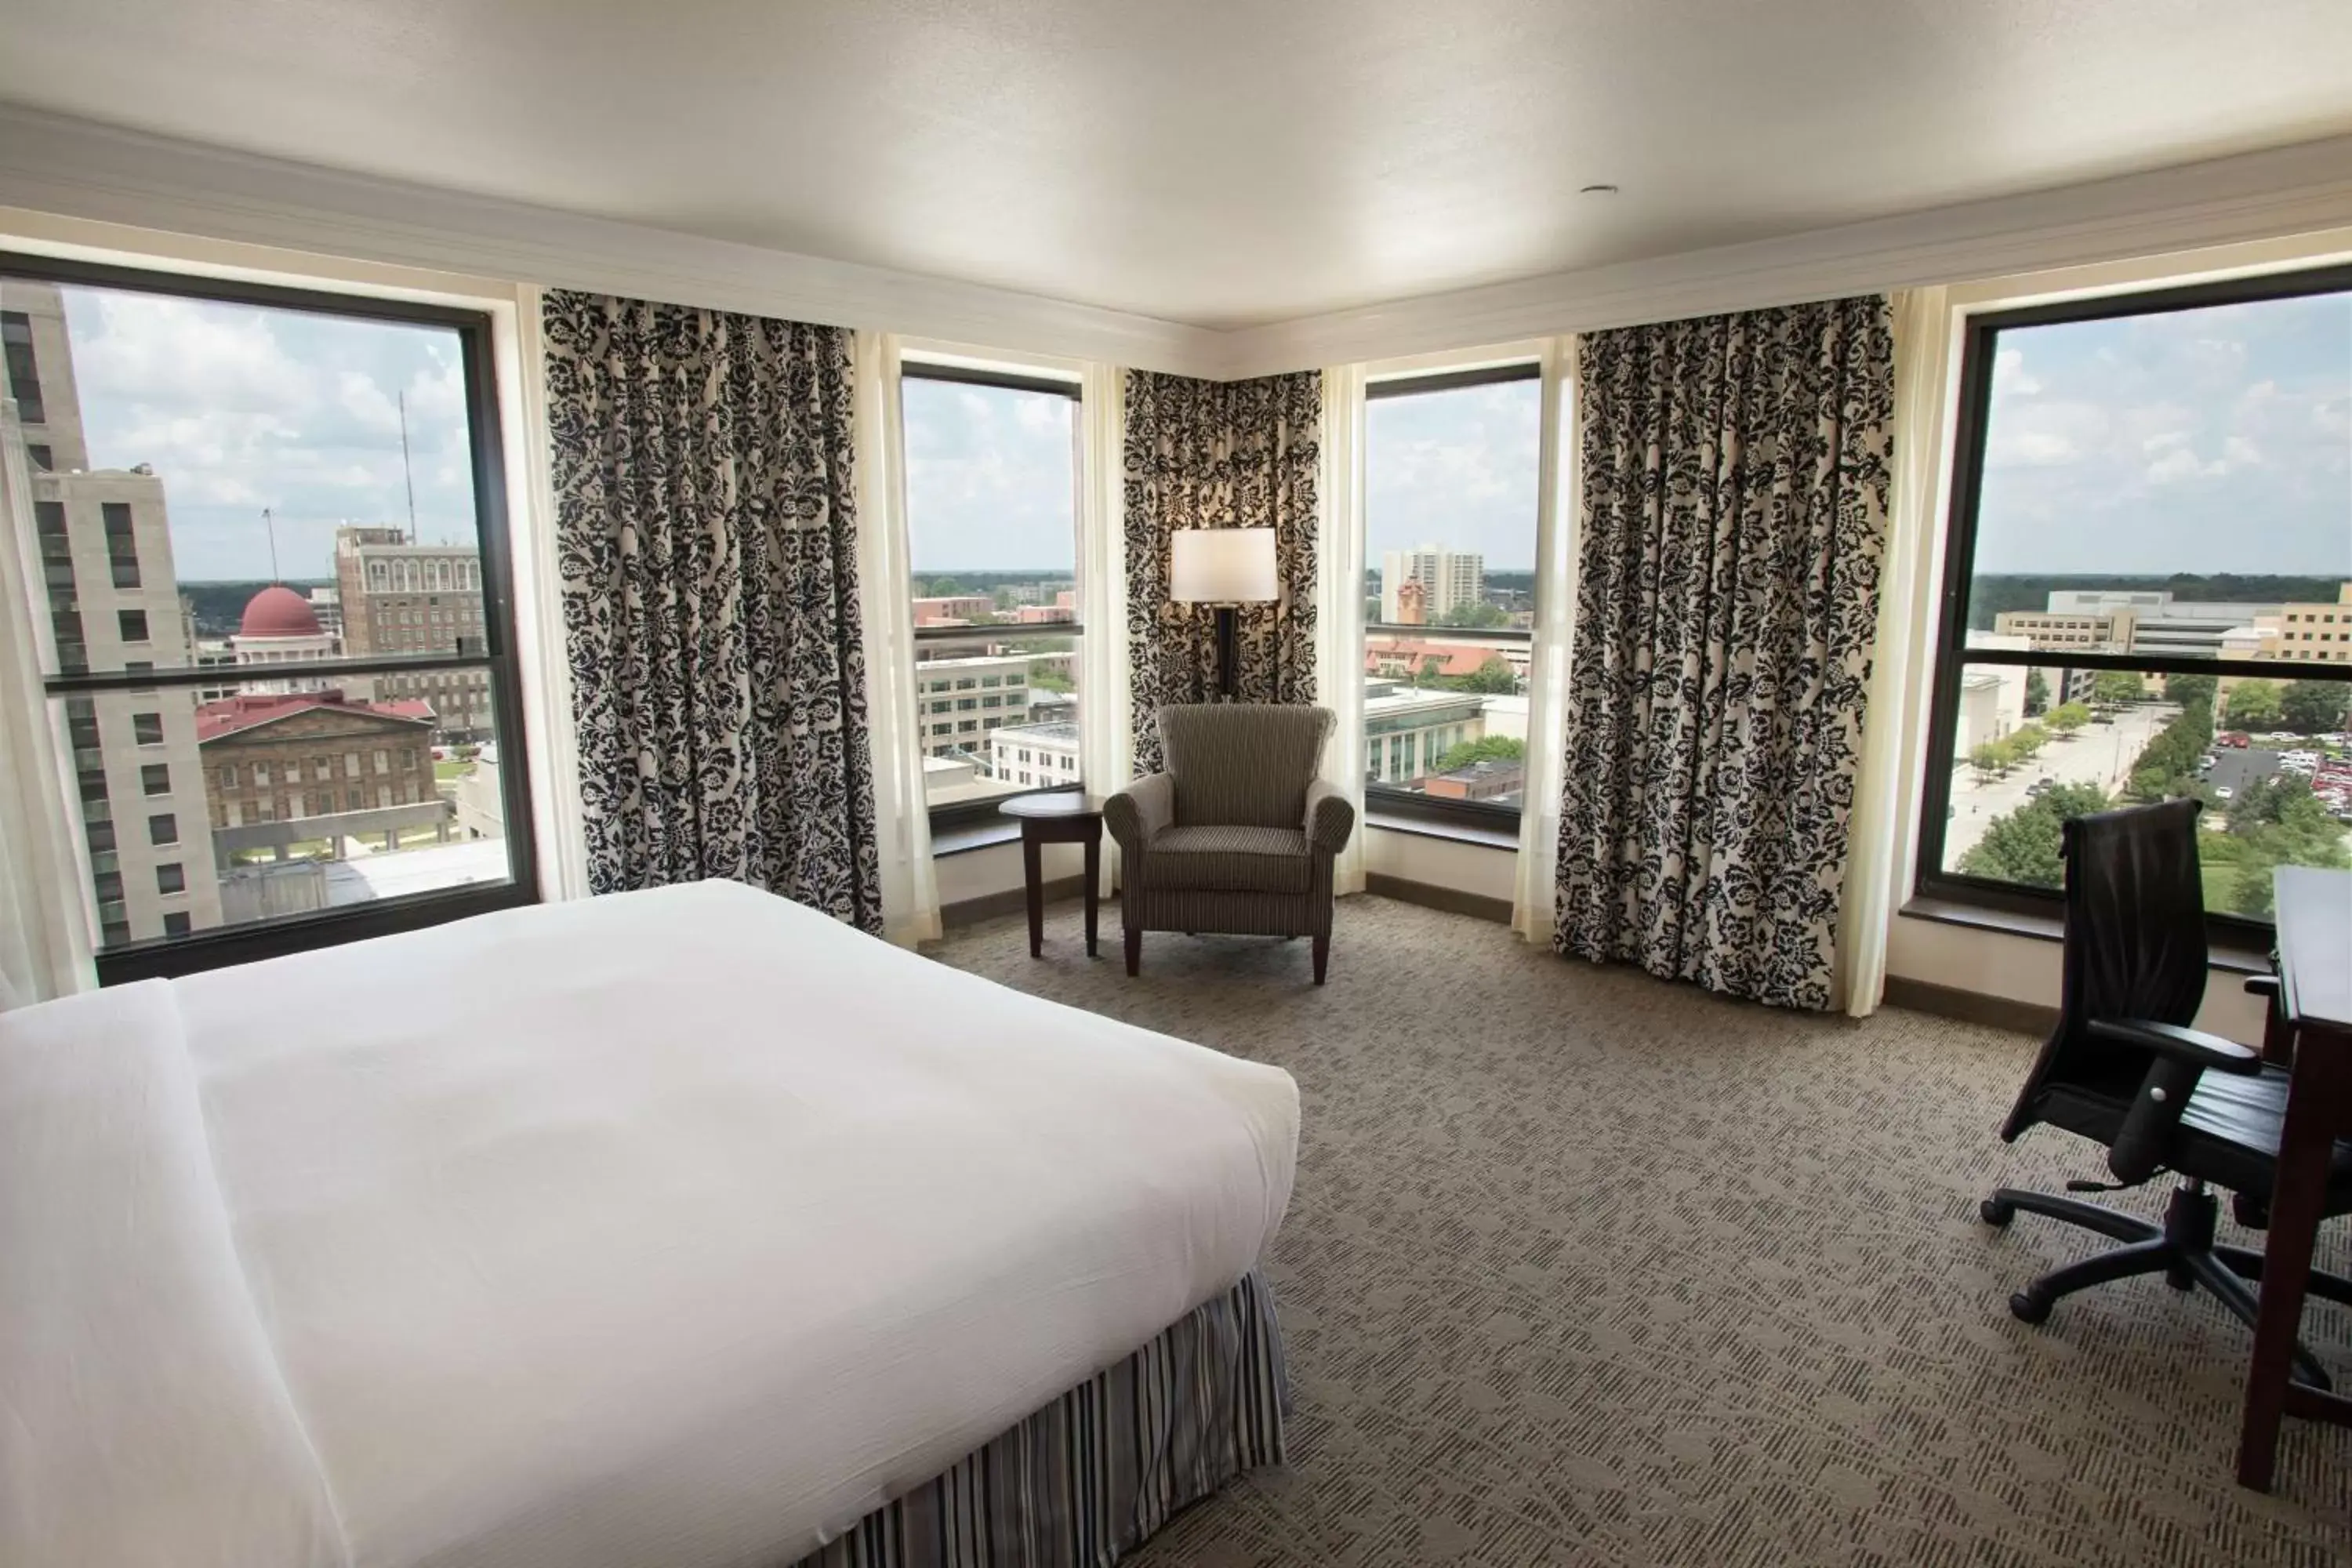 Bedroom, View in President Abraham Lincoln - A Doubletree by Hilton Hotel